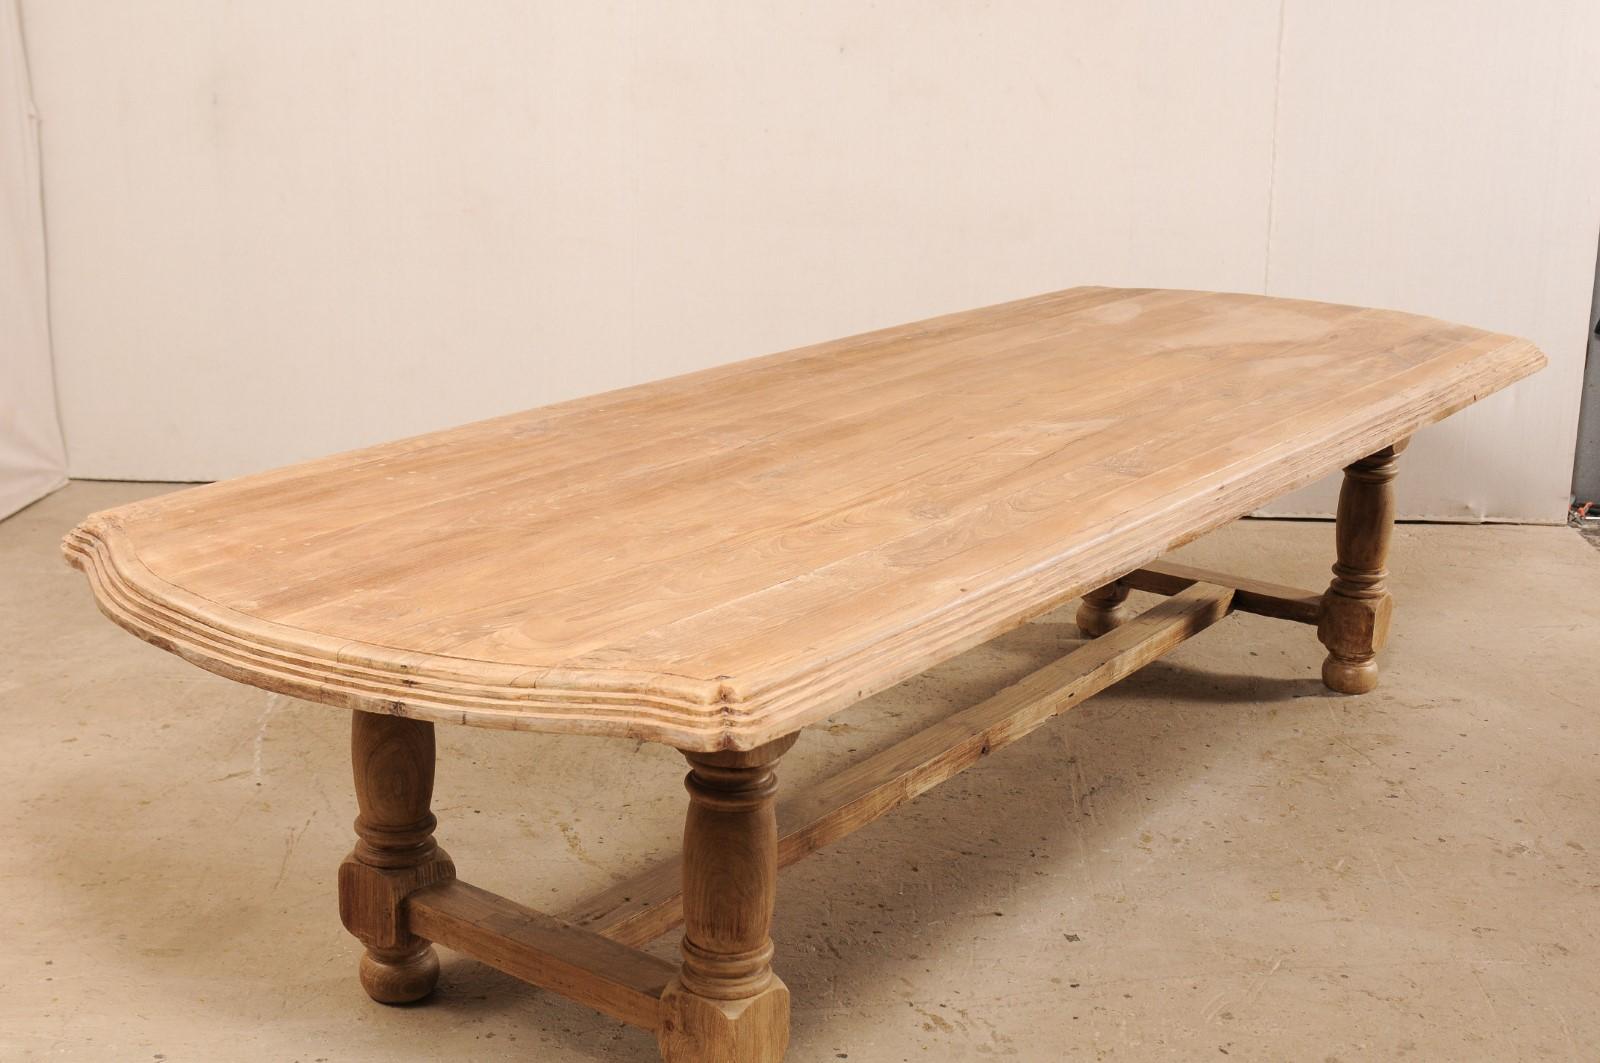 Bleached A 19th C. Anglo-Indian Light Teak Wood Dining Table w/Robust Legs, 11+ Ft Long